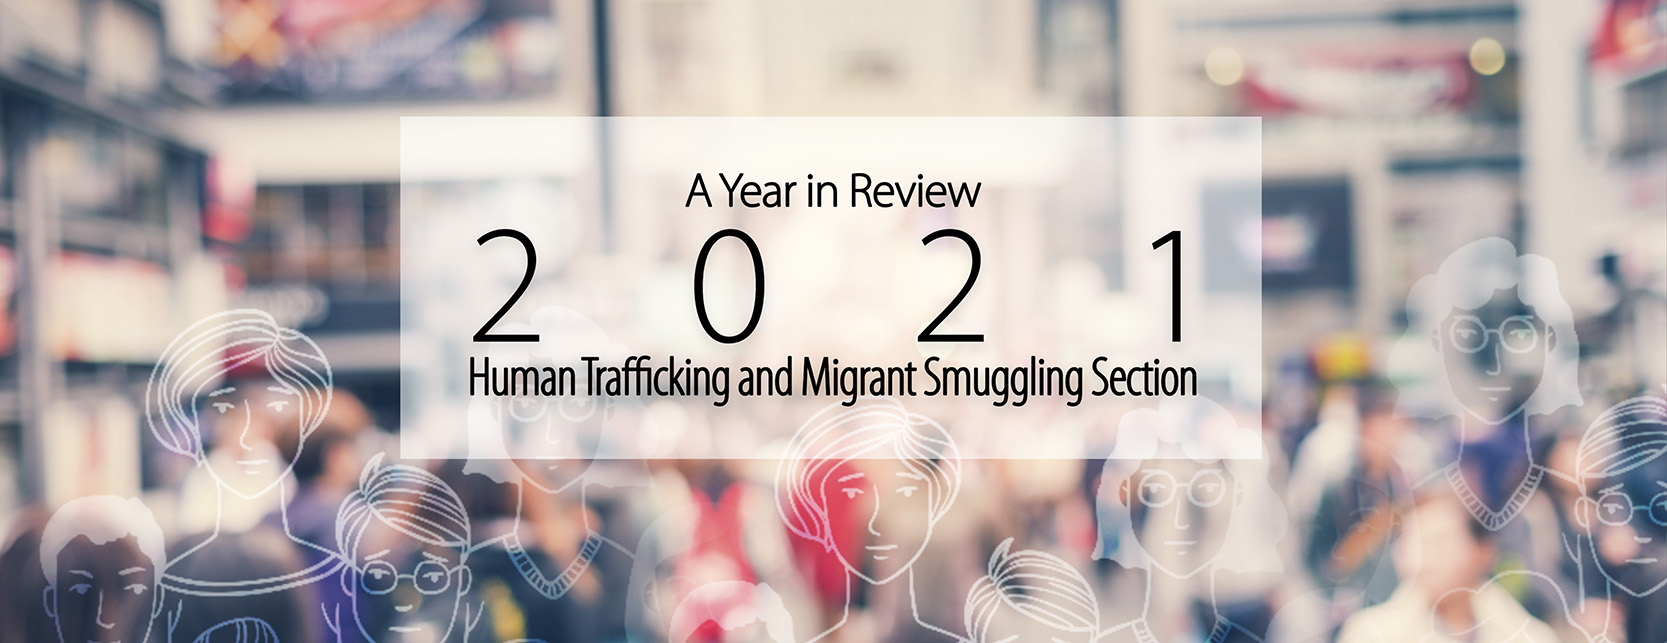 Human Trafficking and Migrant Smuggling Section of the United Nations Office on Drugs and Crime (UNODC) has released its 2021 Annual Report